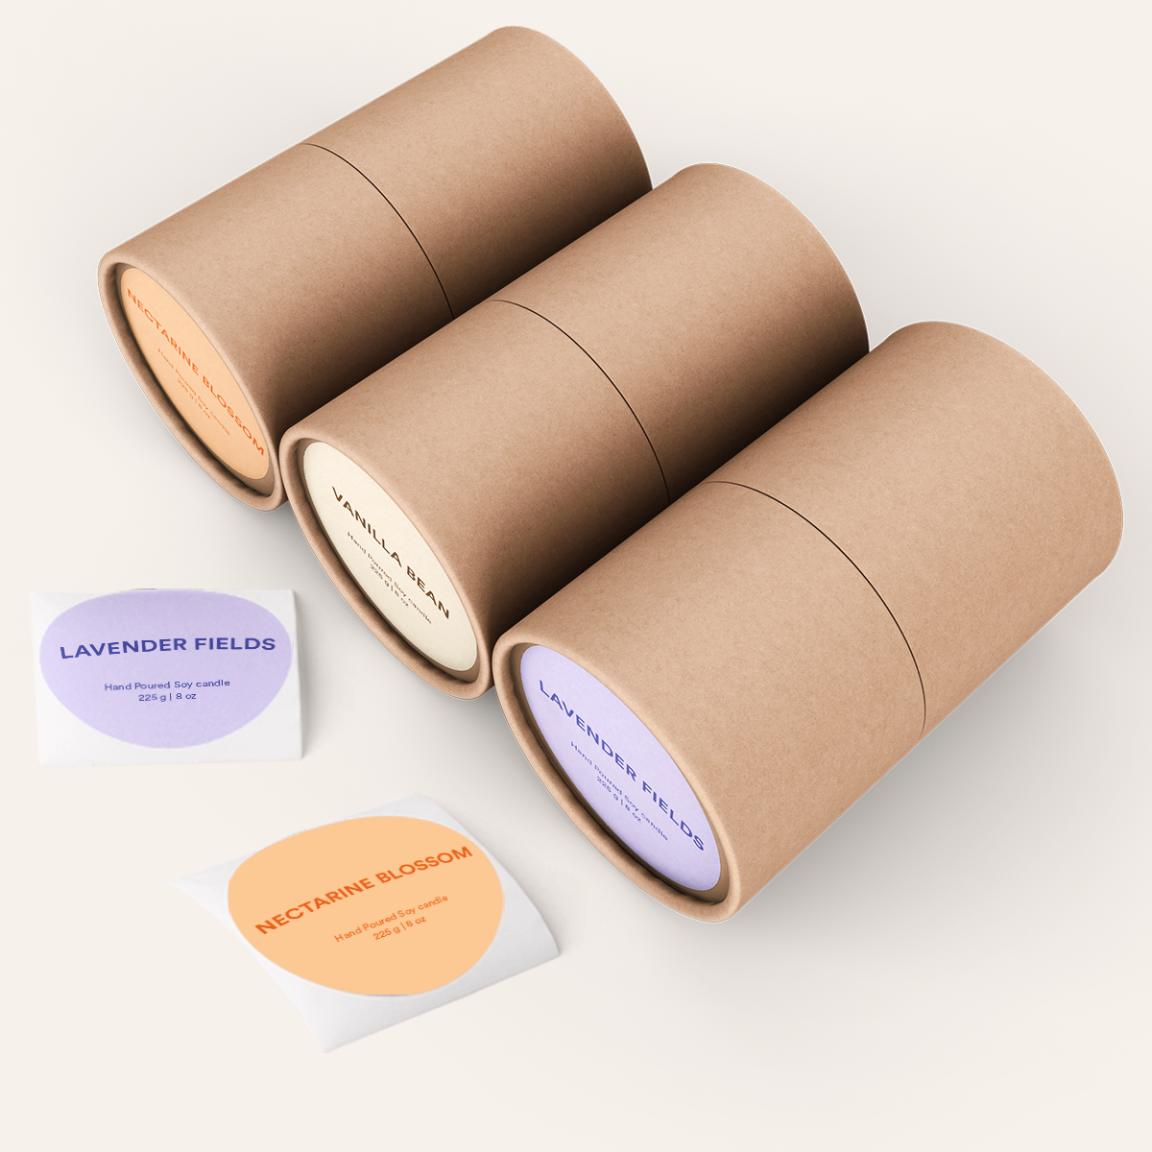 Eco friendly Postal Tubes and Cardboard Poster Tubes For Artwork Packaging